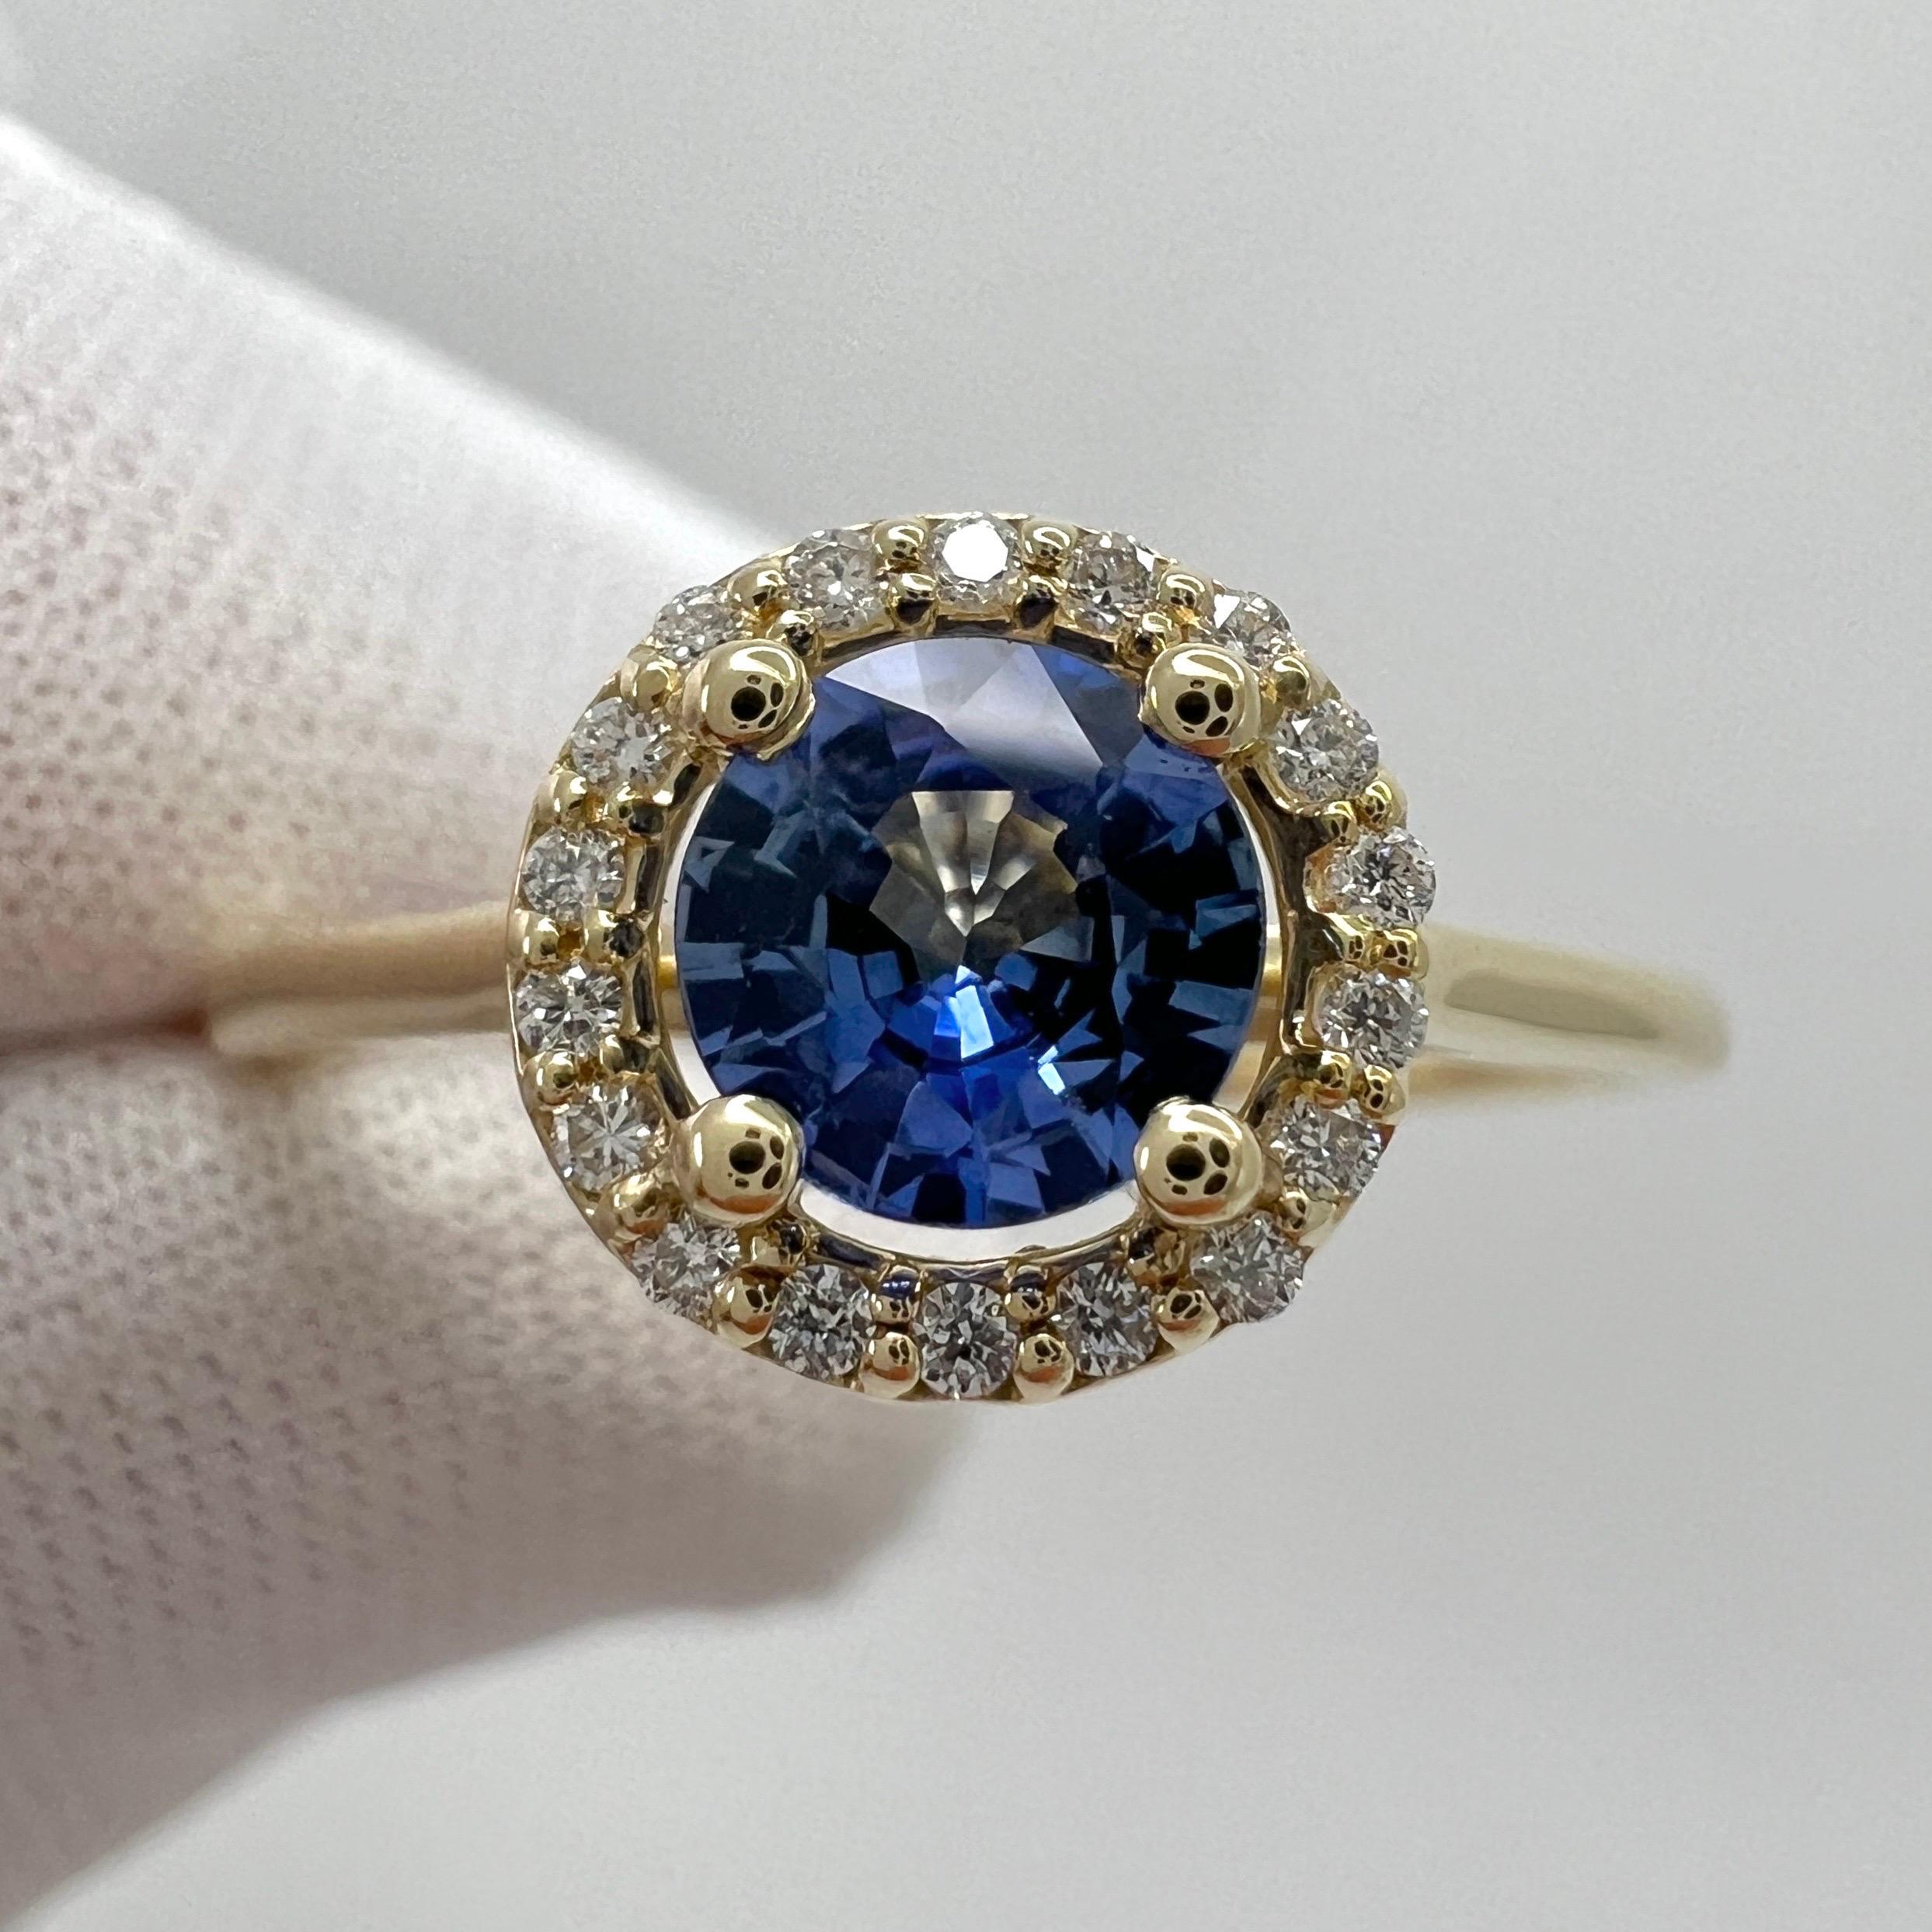 Vivid Bright Blue Ceylon Sapphire And Diamond Round Cut 18k Yellow Gold Halo Ring

Stylish modern halo ring featuring a fine natural vivid blue Ceylon sapphire with a carat weight of 0.54ct. This sapphire has an excellent round cut and excellent